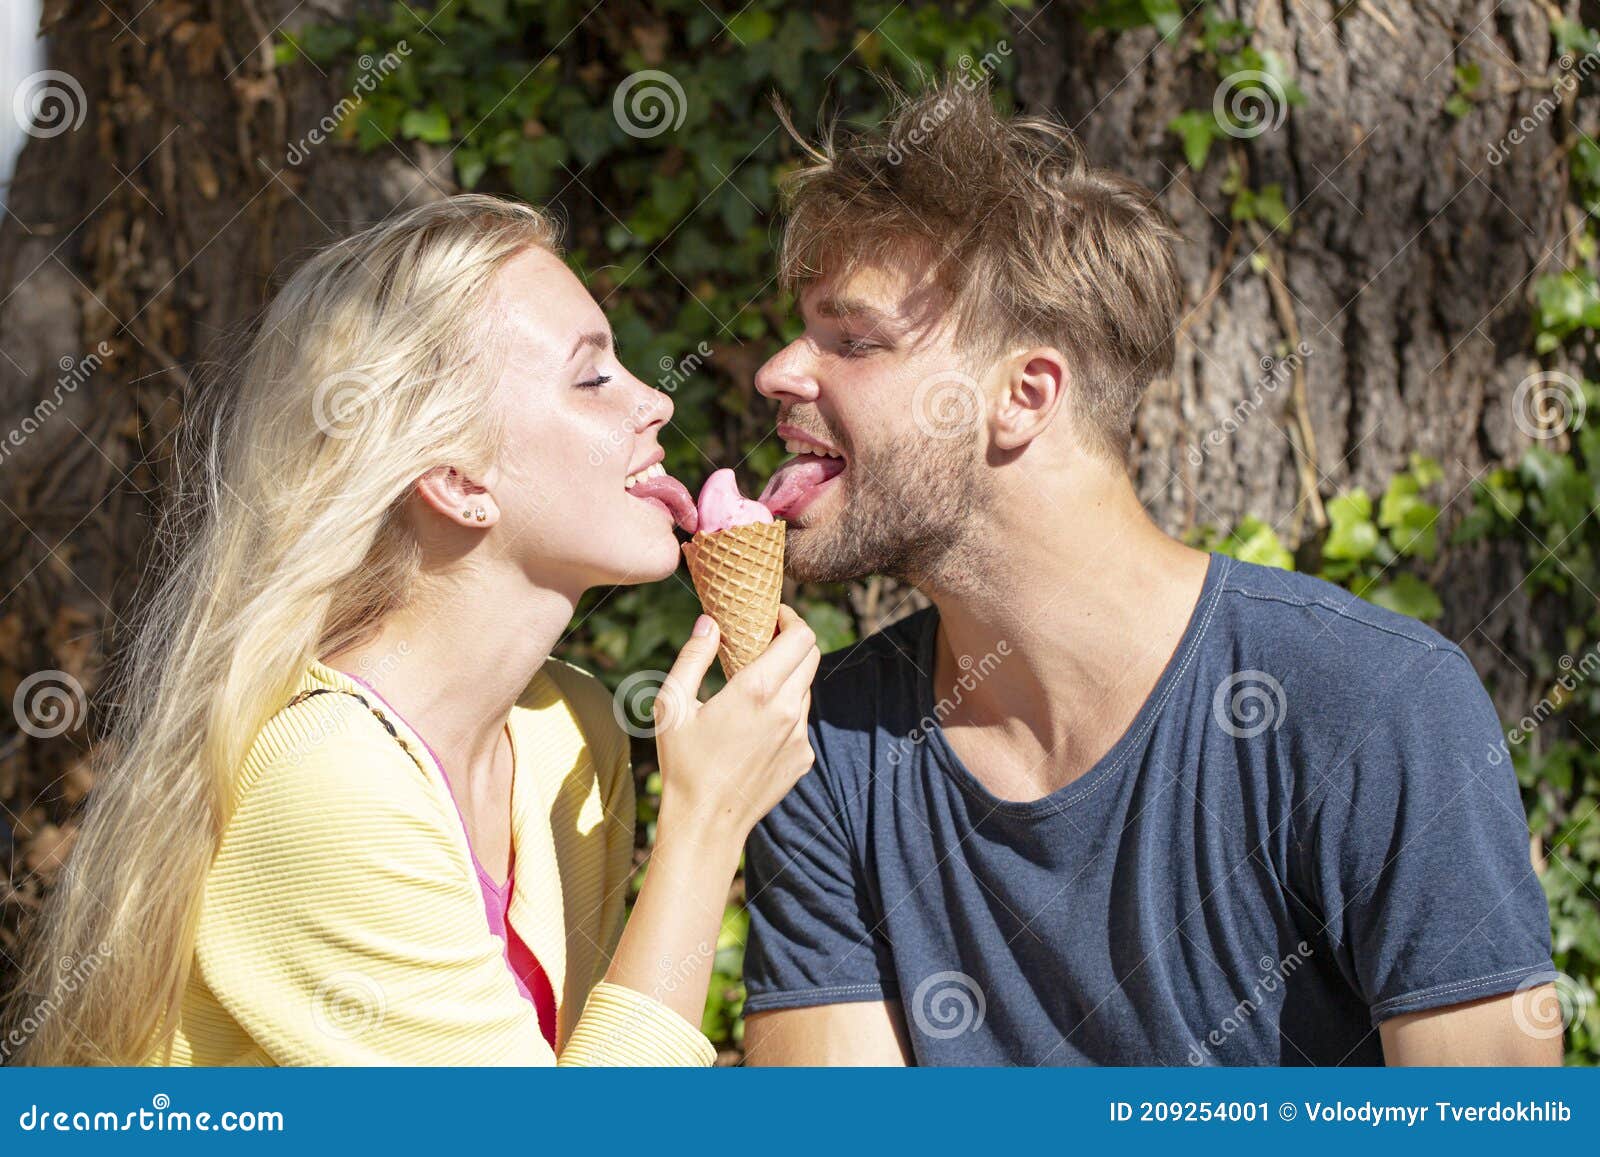 Cute Couple Romantic Dating and Eating Ice Cream. Young Pair ...